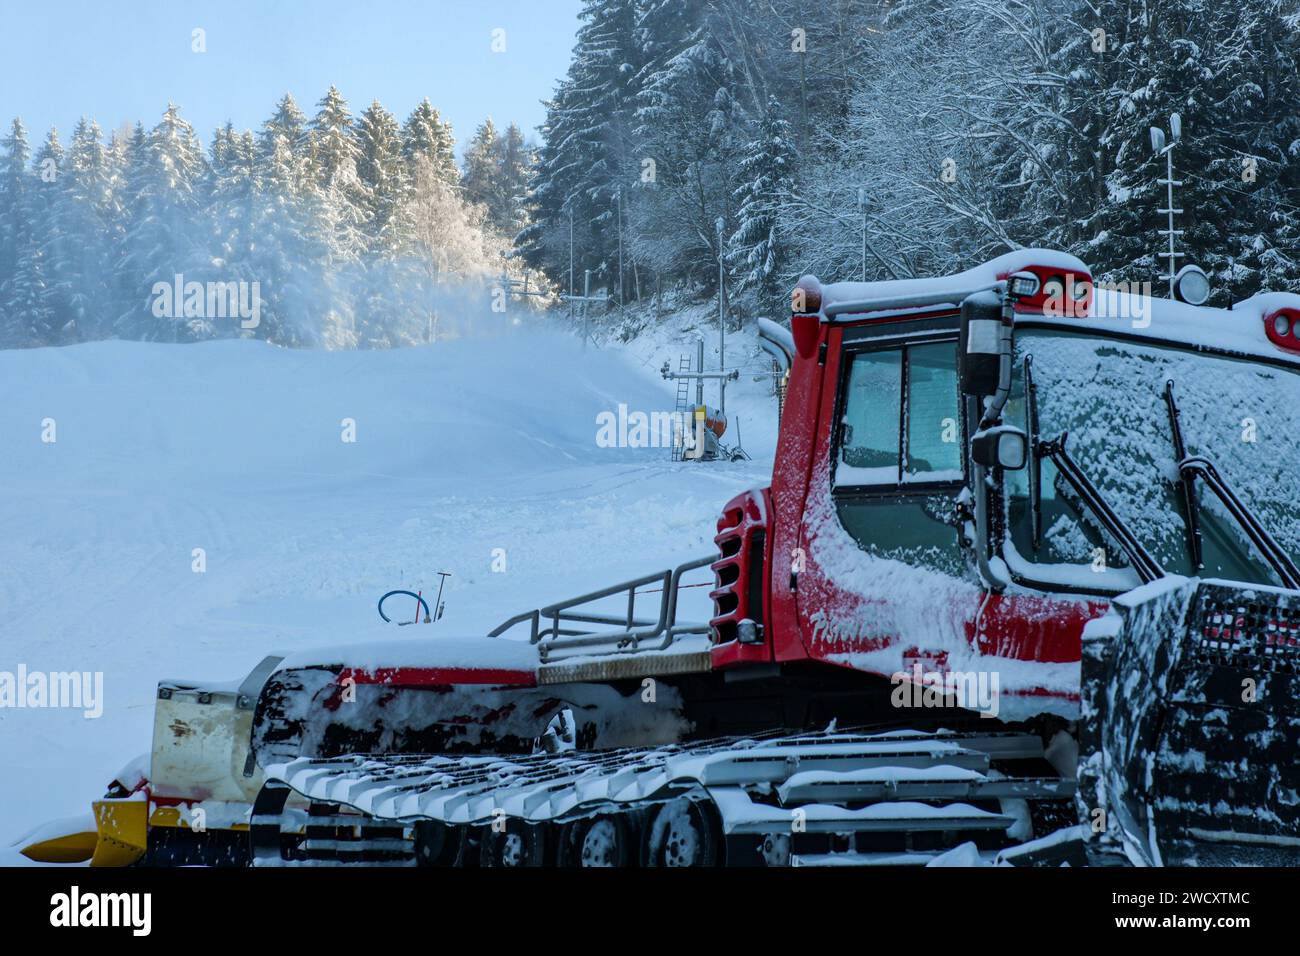 Ratrack spreads snow against the background of a snow cannon, as the snow sprays, the sun shines on the trees in the background. Stock Photo